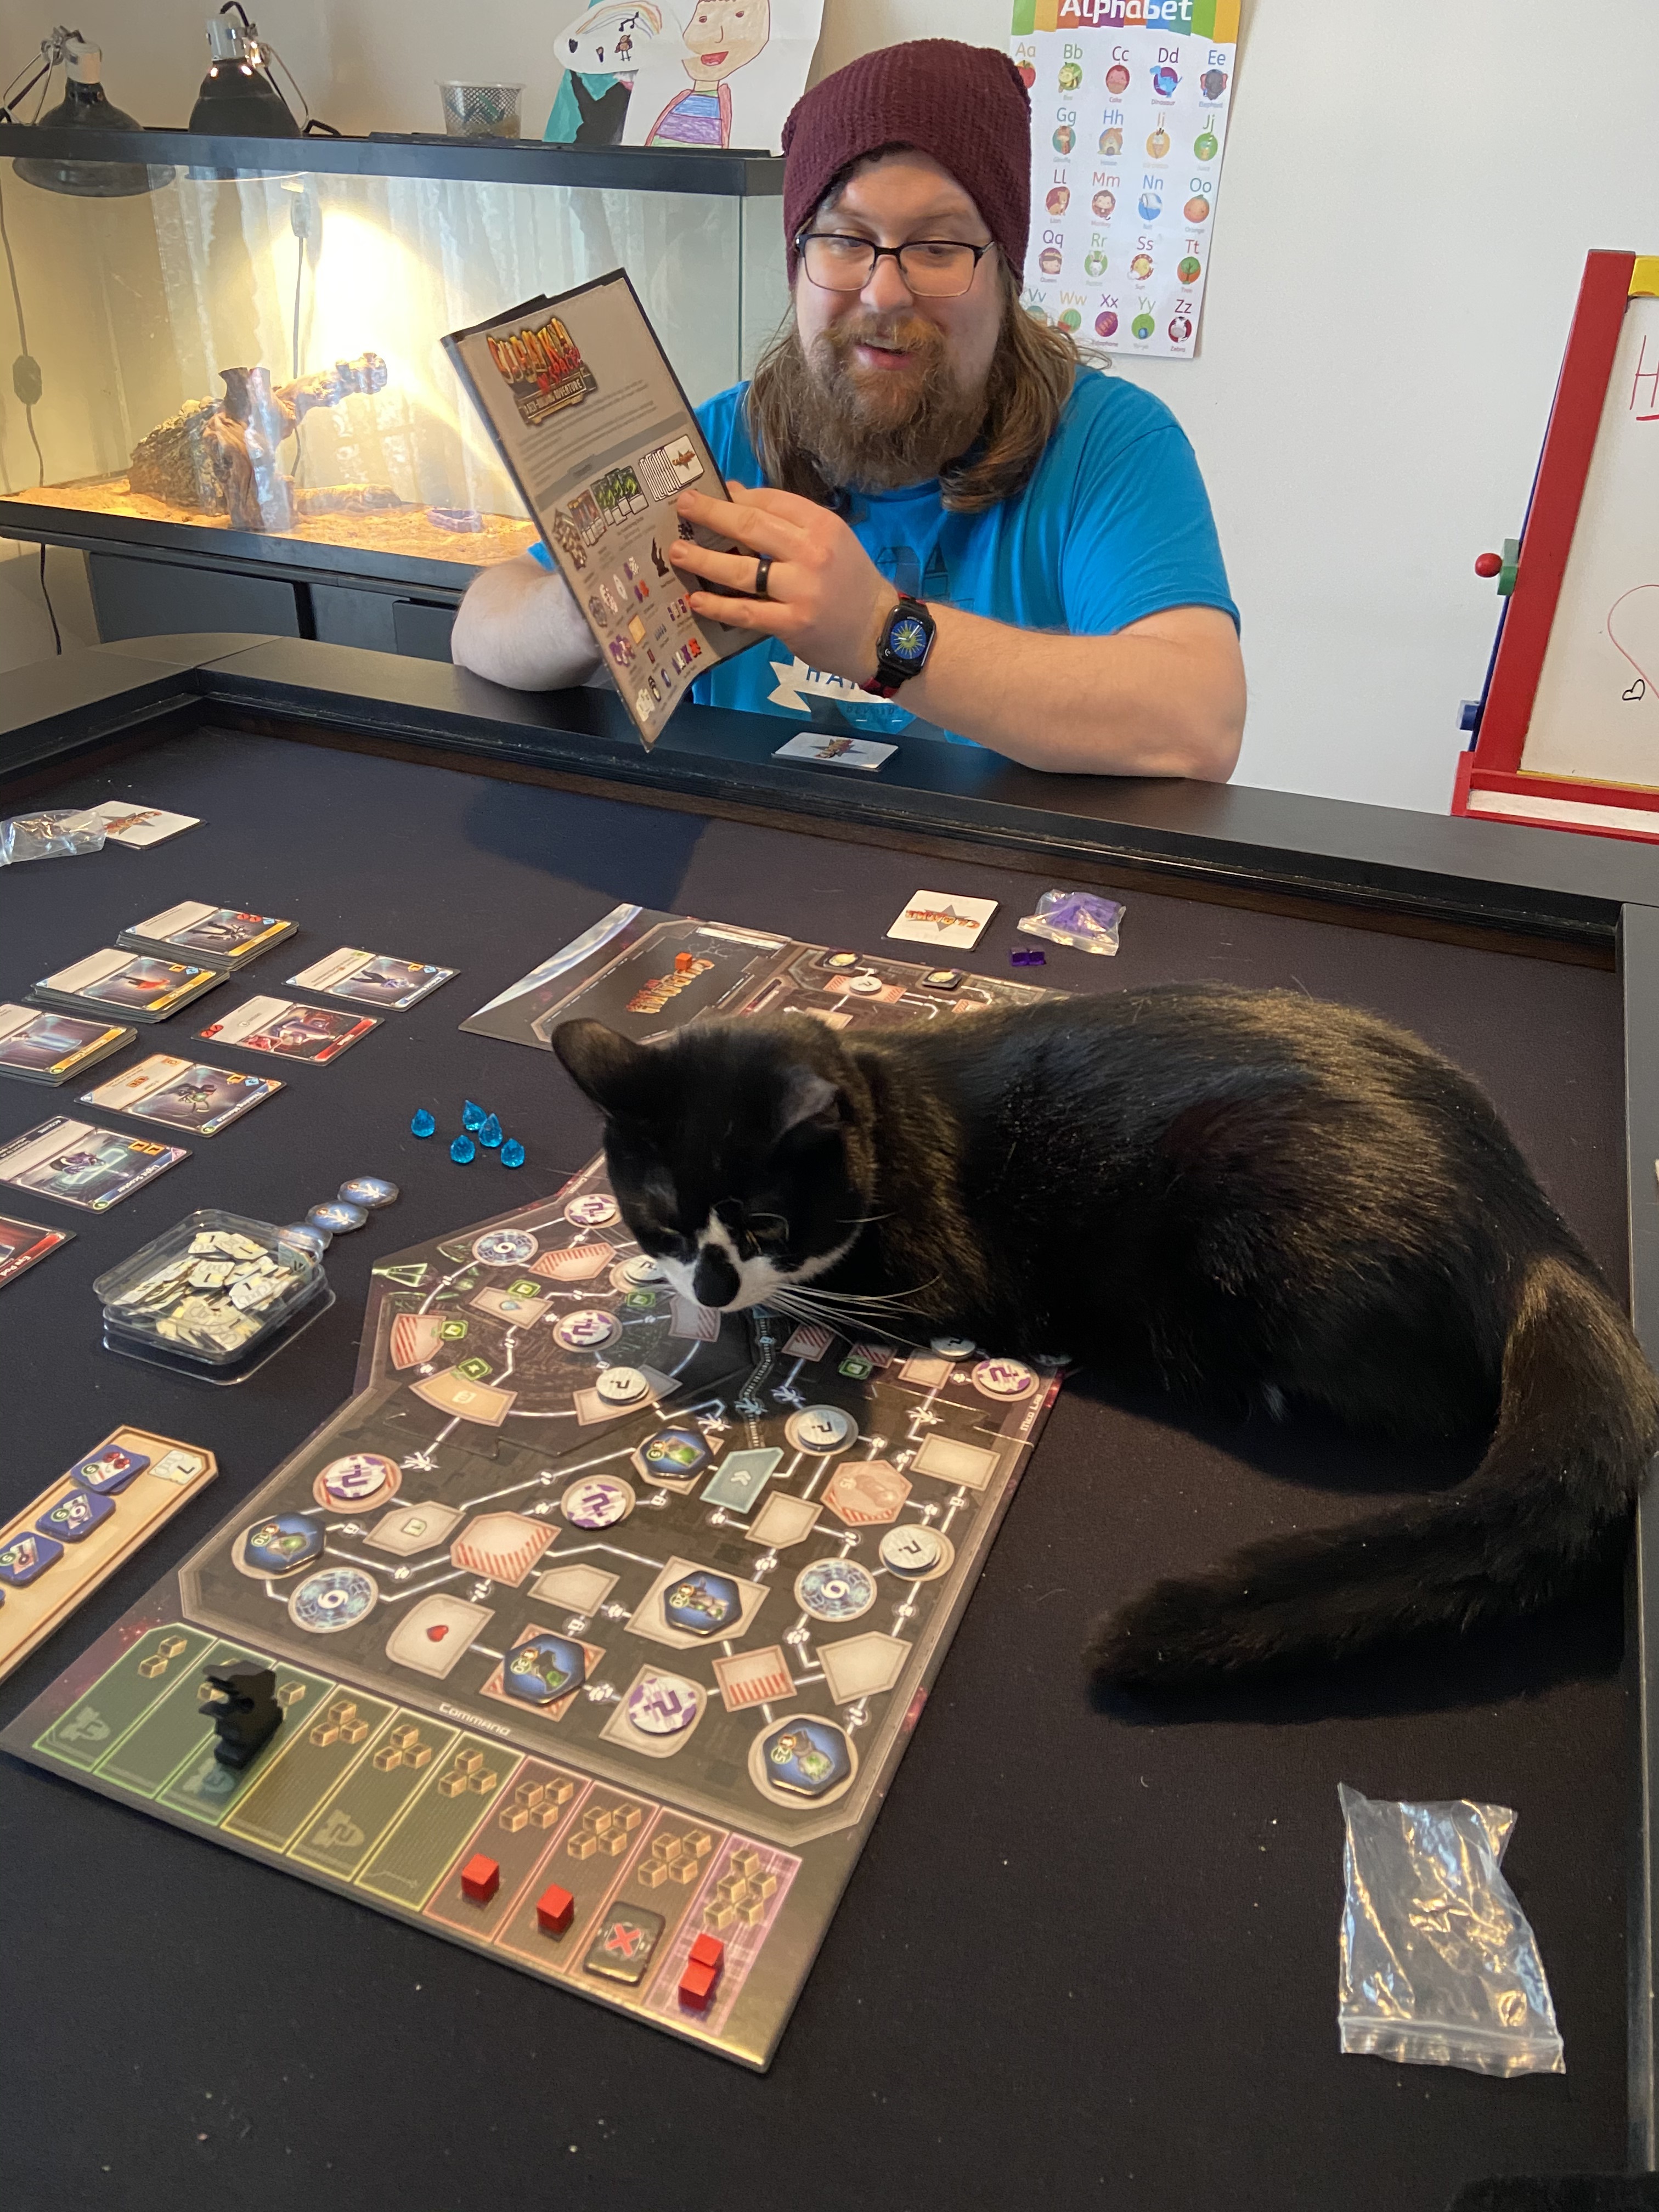 Photograph of Aaron with his cat playing board games